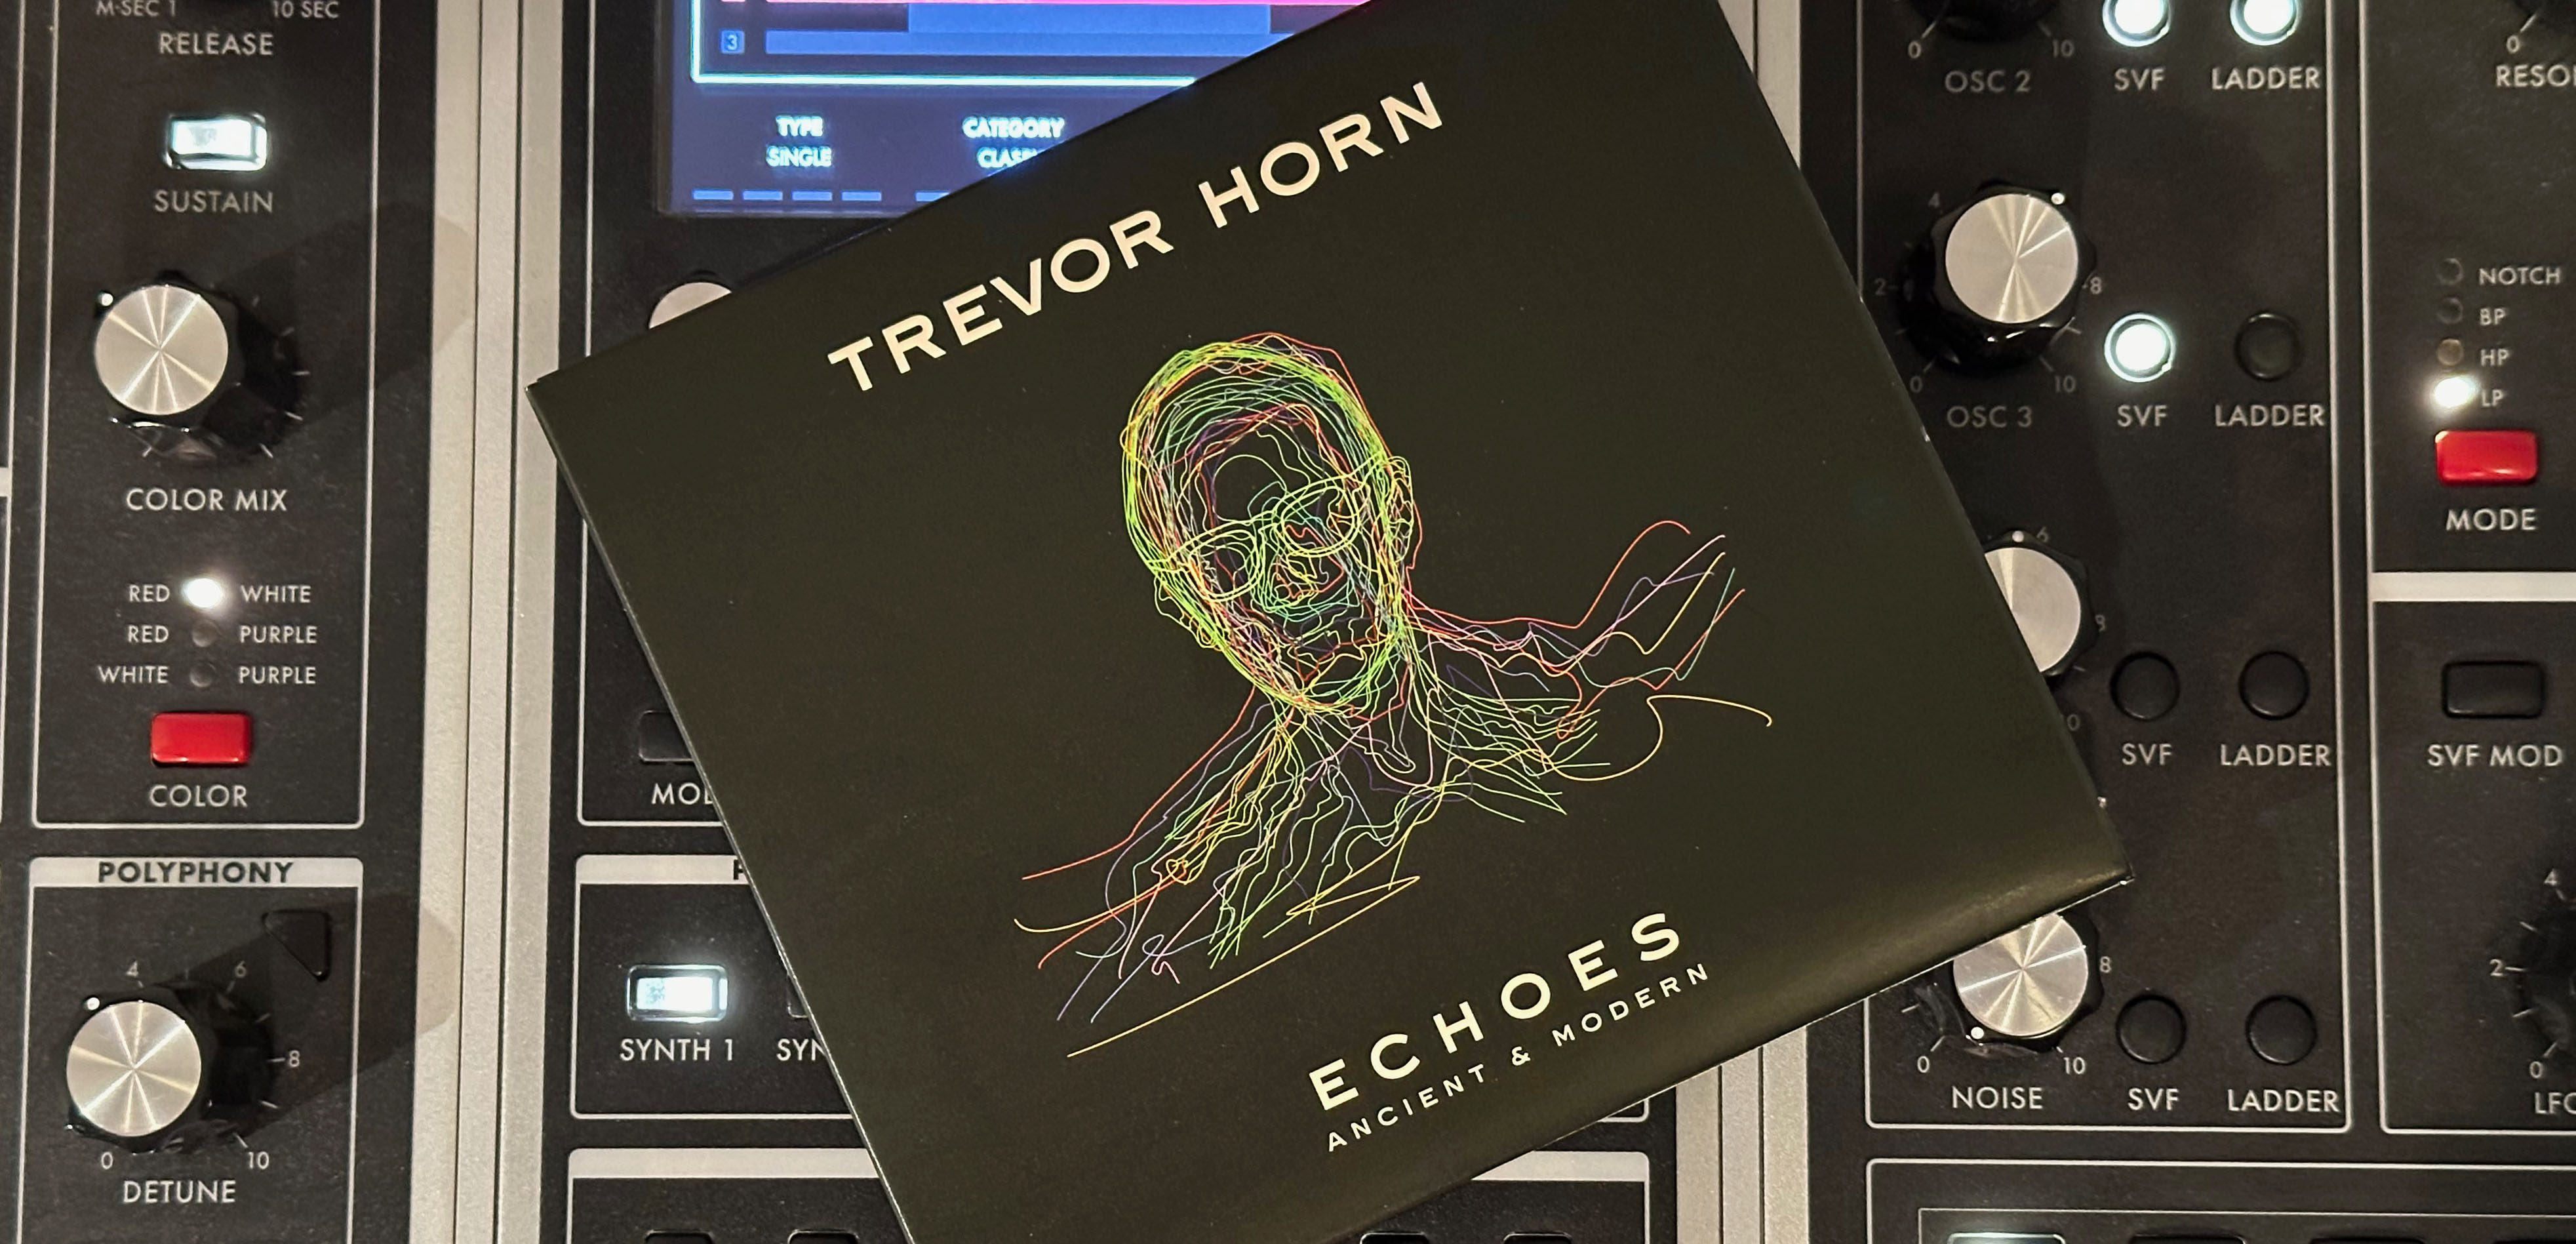 Review: Trevor Horn’s album “Echoes Old and New” 2023